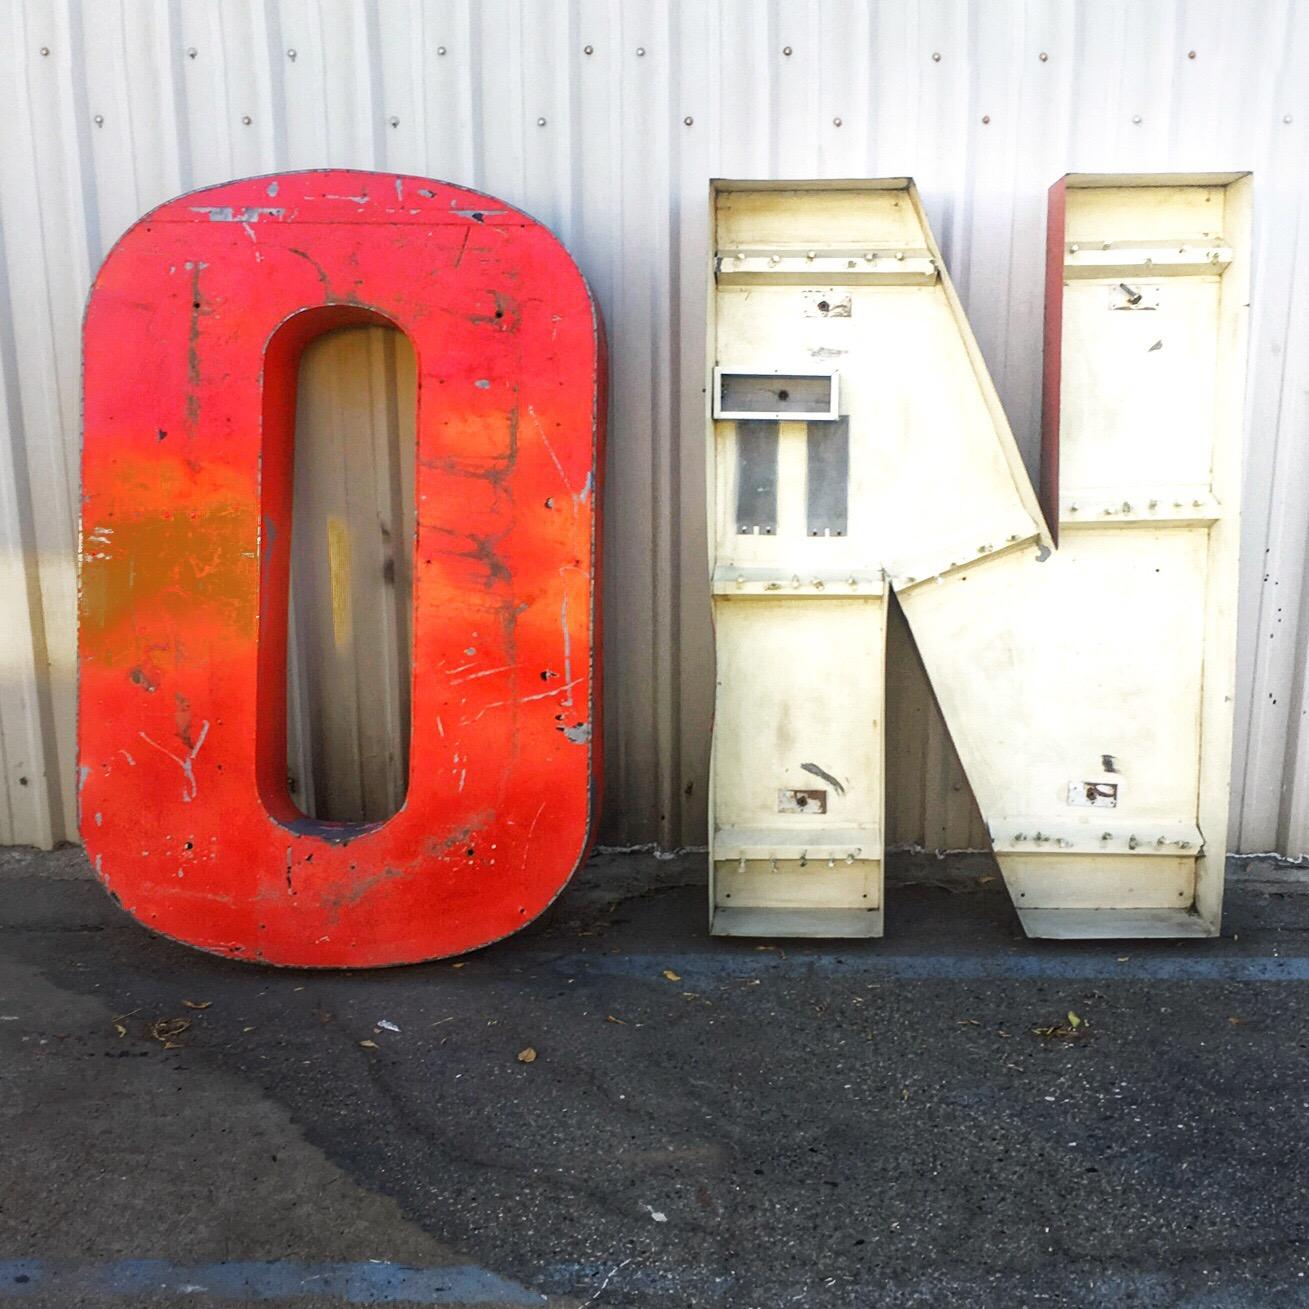 Huge weathered on Industrial sign. Very cool.

Dimensions are per letter.